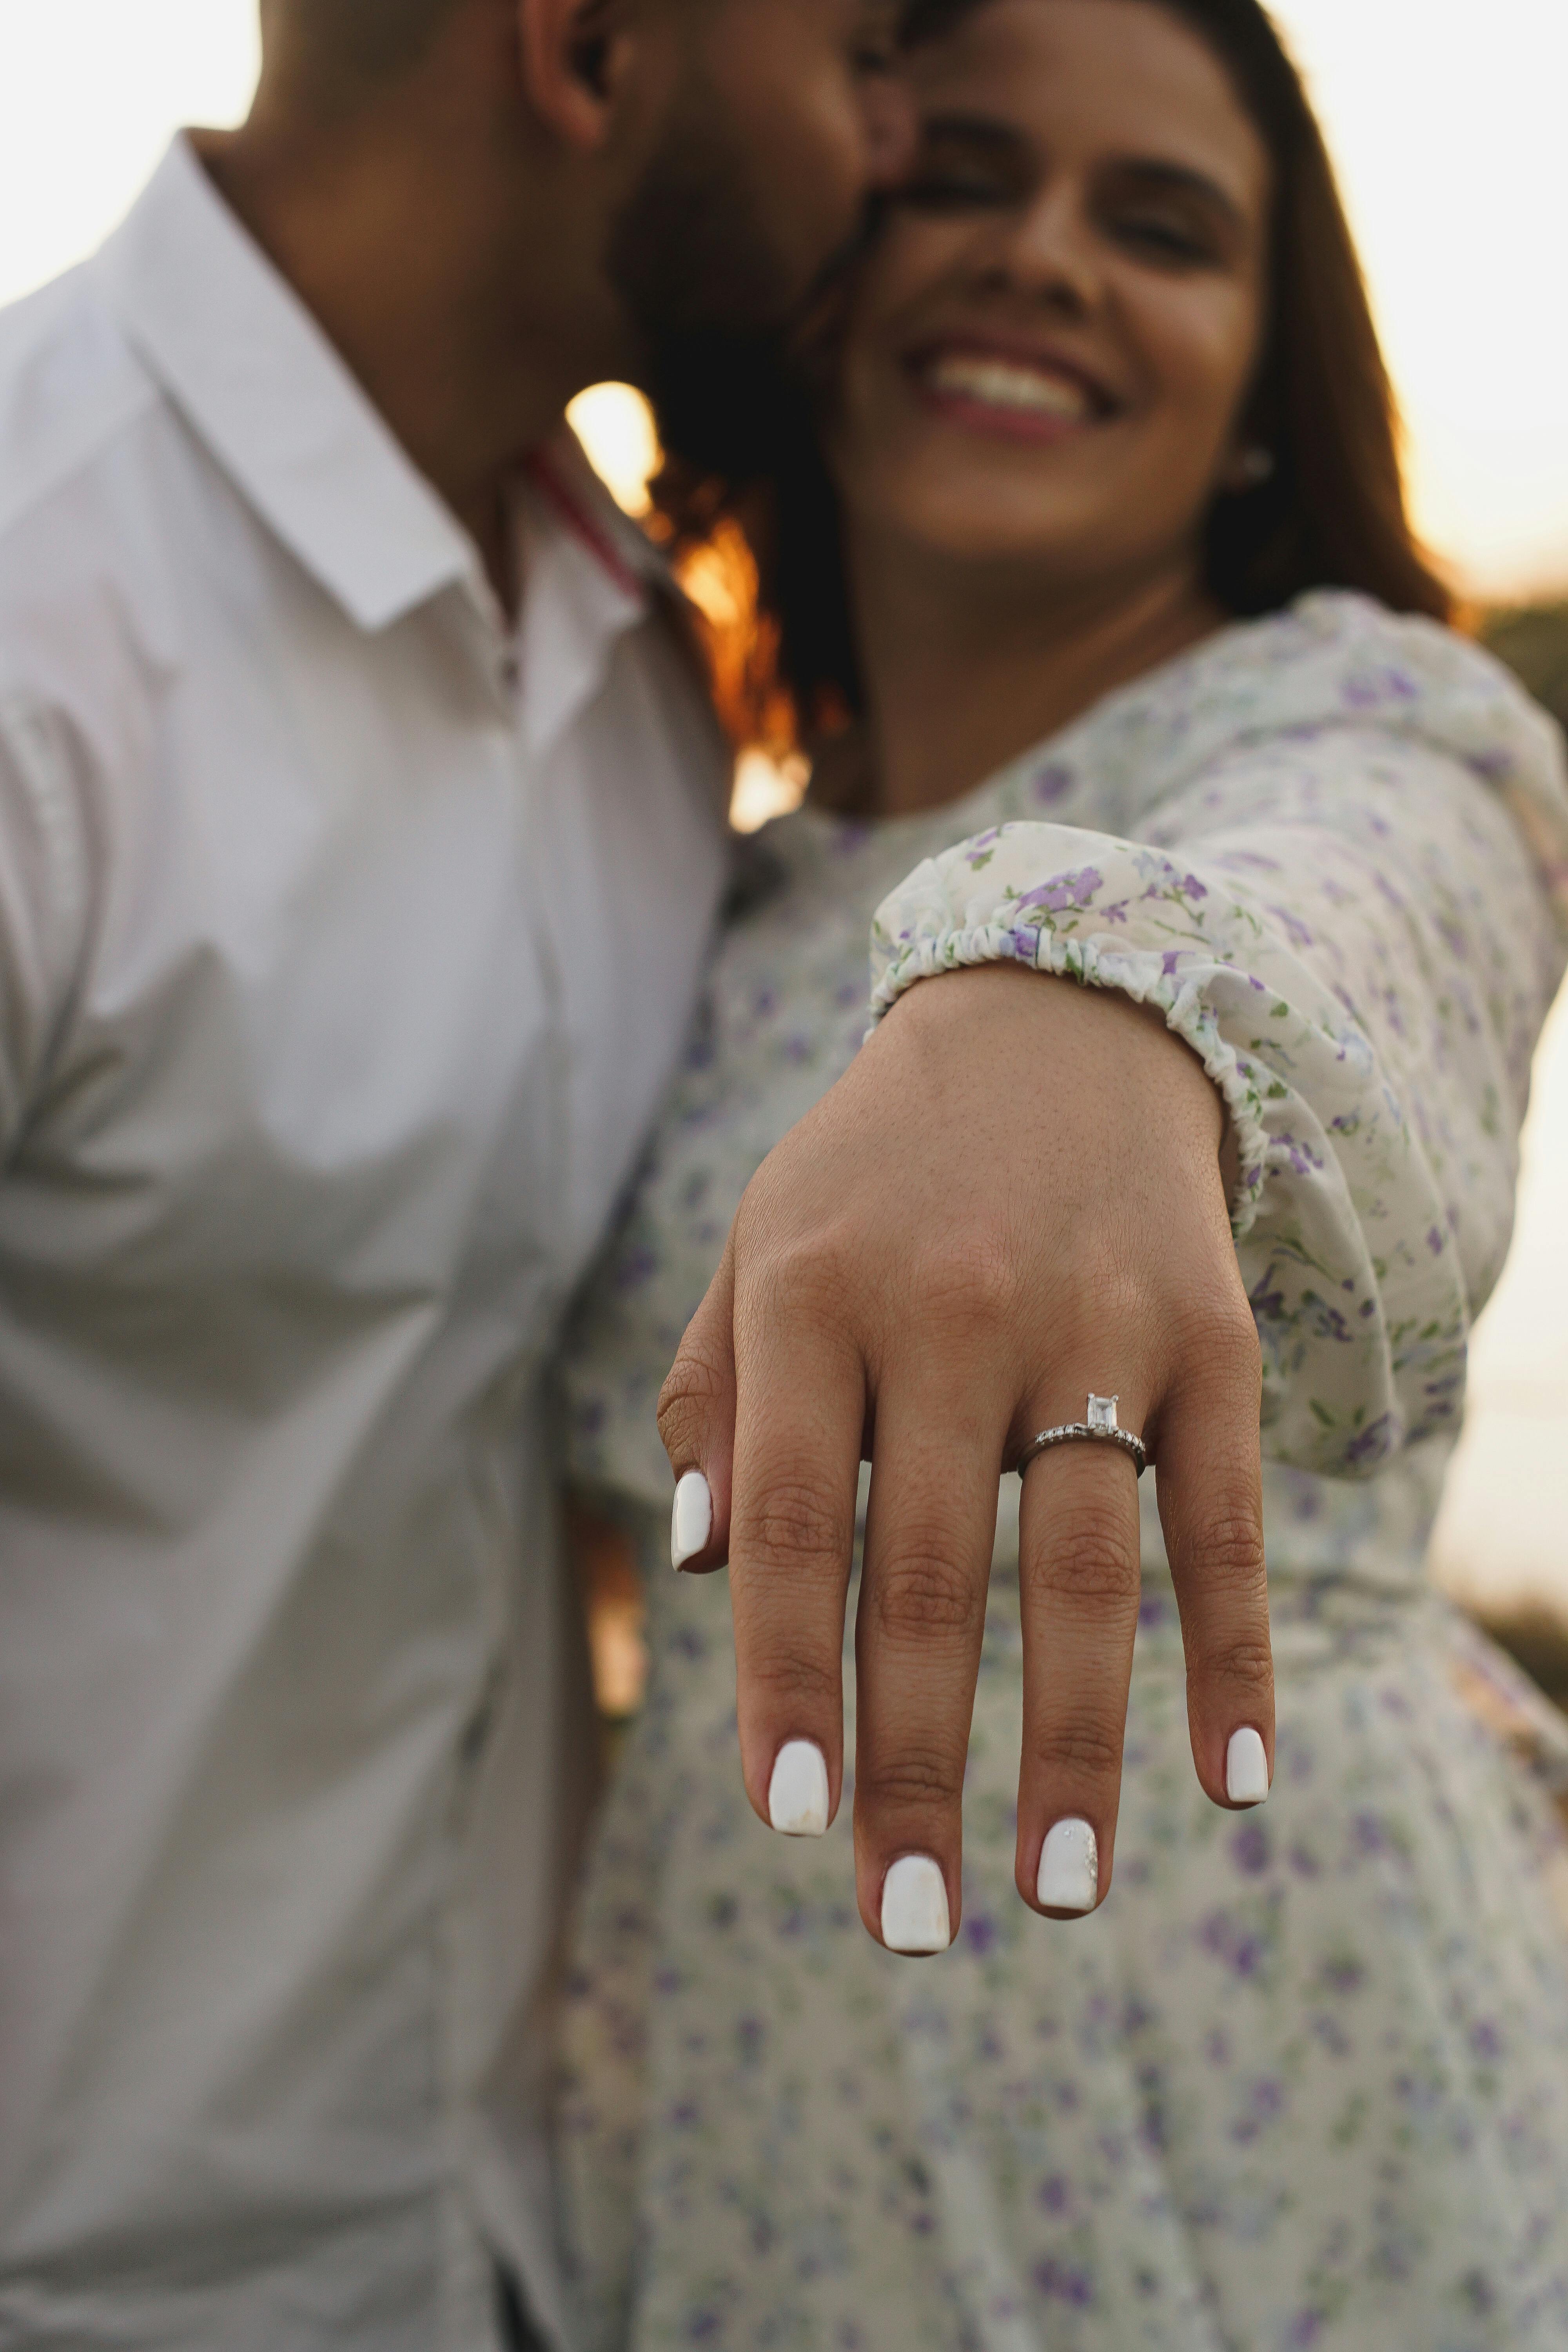 Happy couple with the bride showing off her wedding ring | Source: Pexels